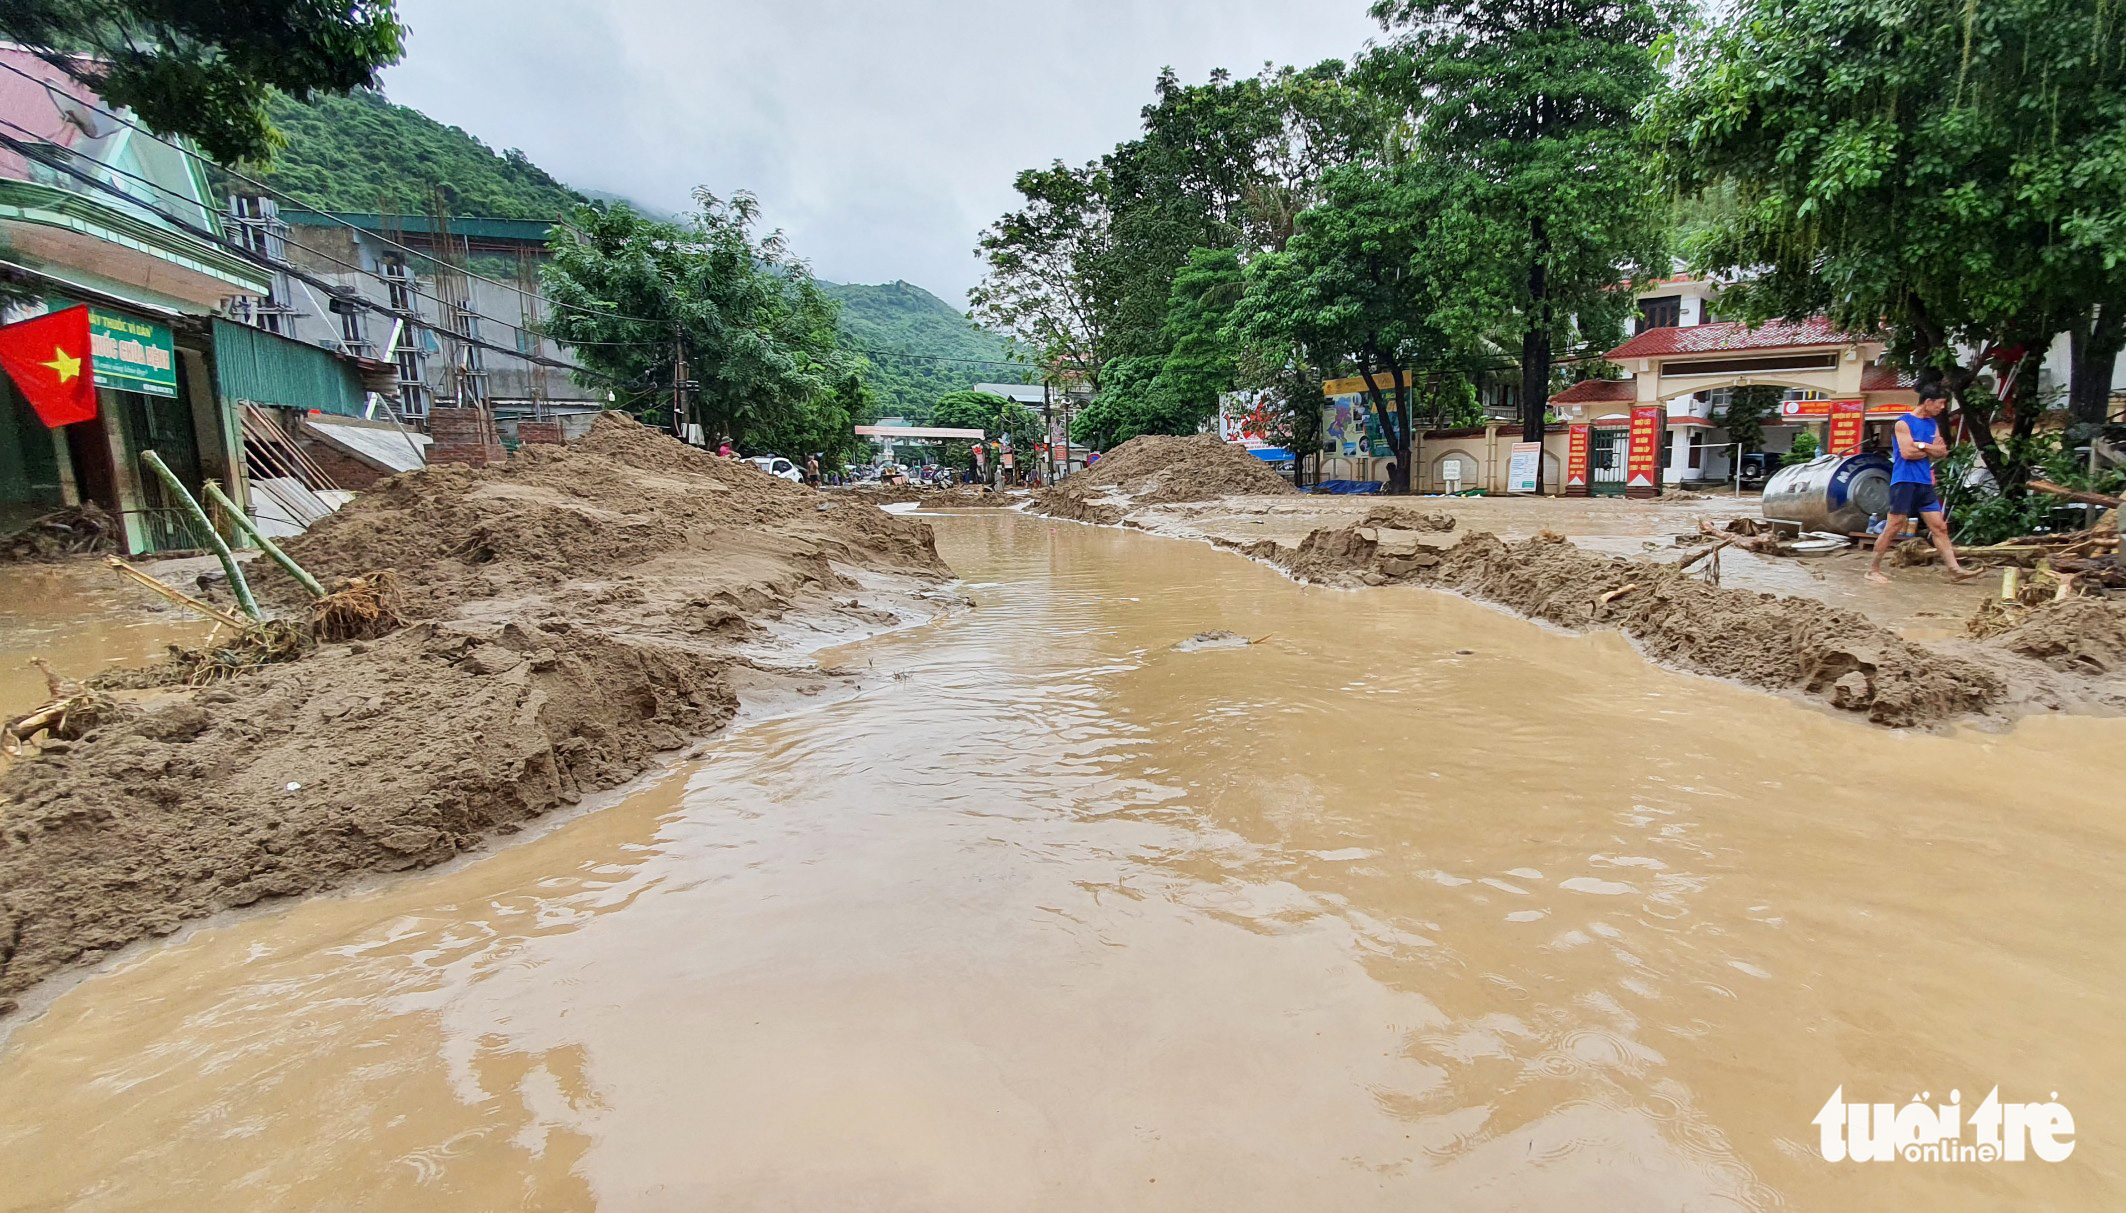 Mud and floodwaters block National Highway 7 in Muong Xen Town following a flash flood in Ky Son District, Nghe An Province, Vietnam, October 2, 2022. Photo: N. Thang / Tuoi Tre